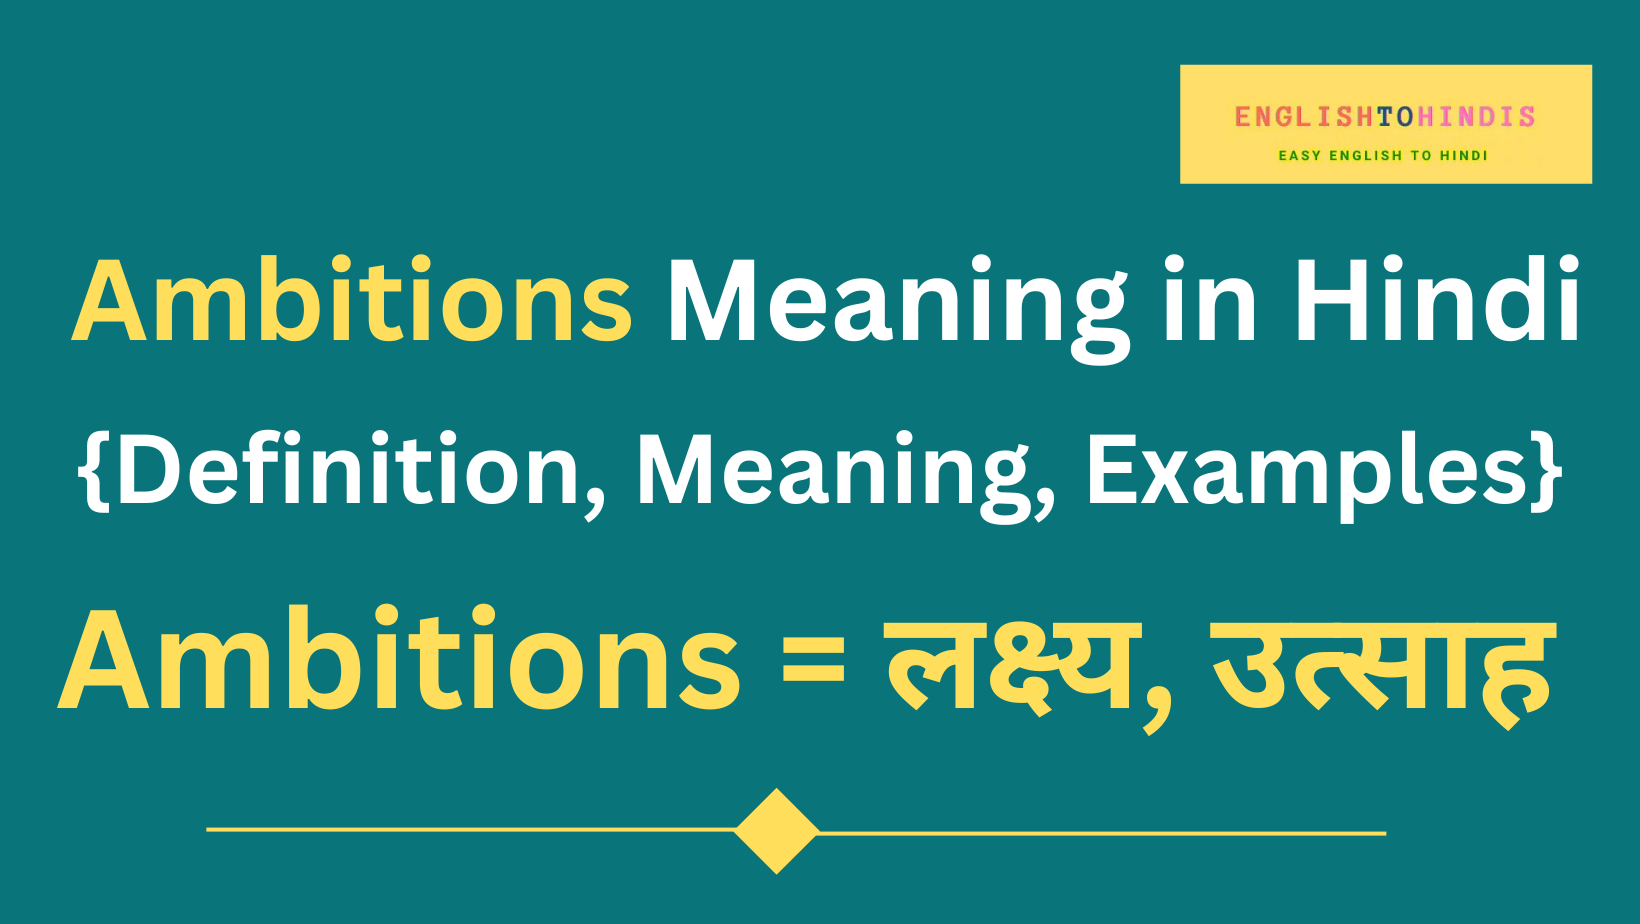 Ambitions Meaning in Hindi